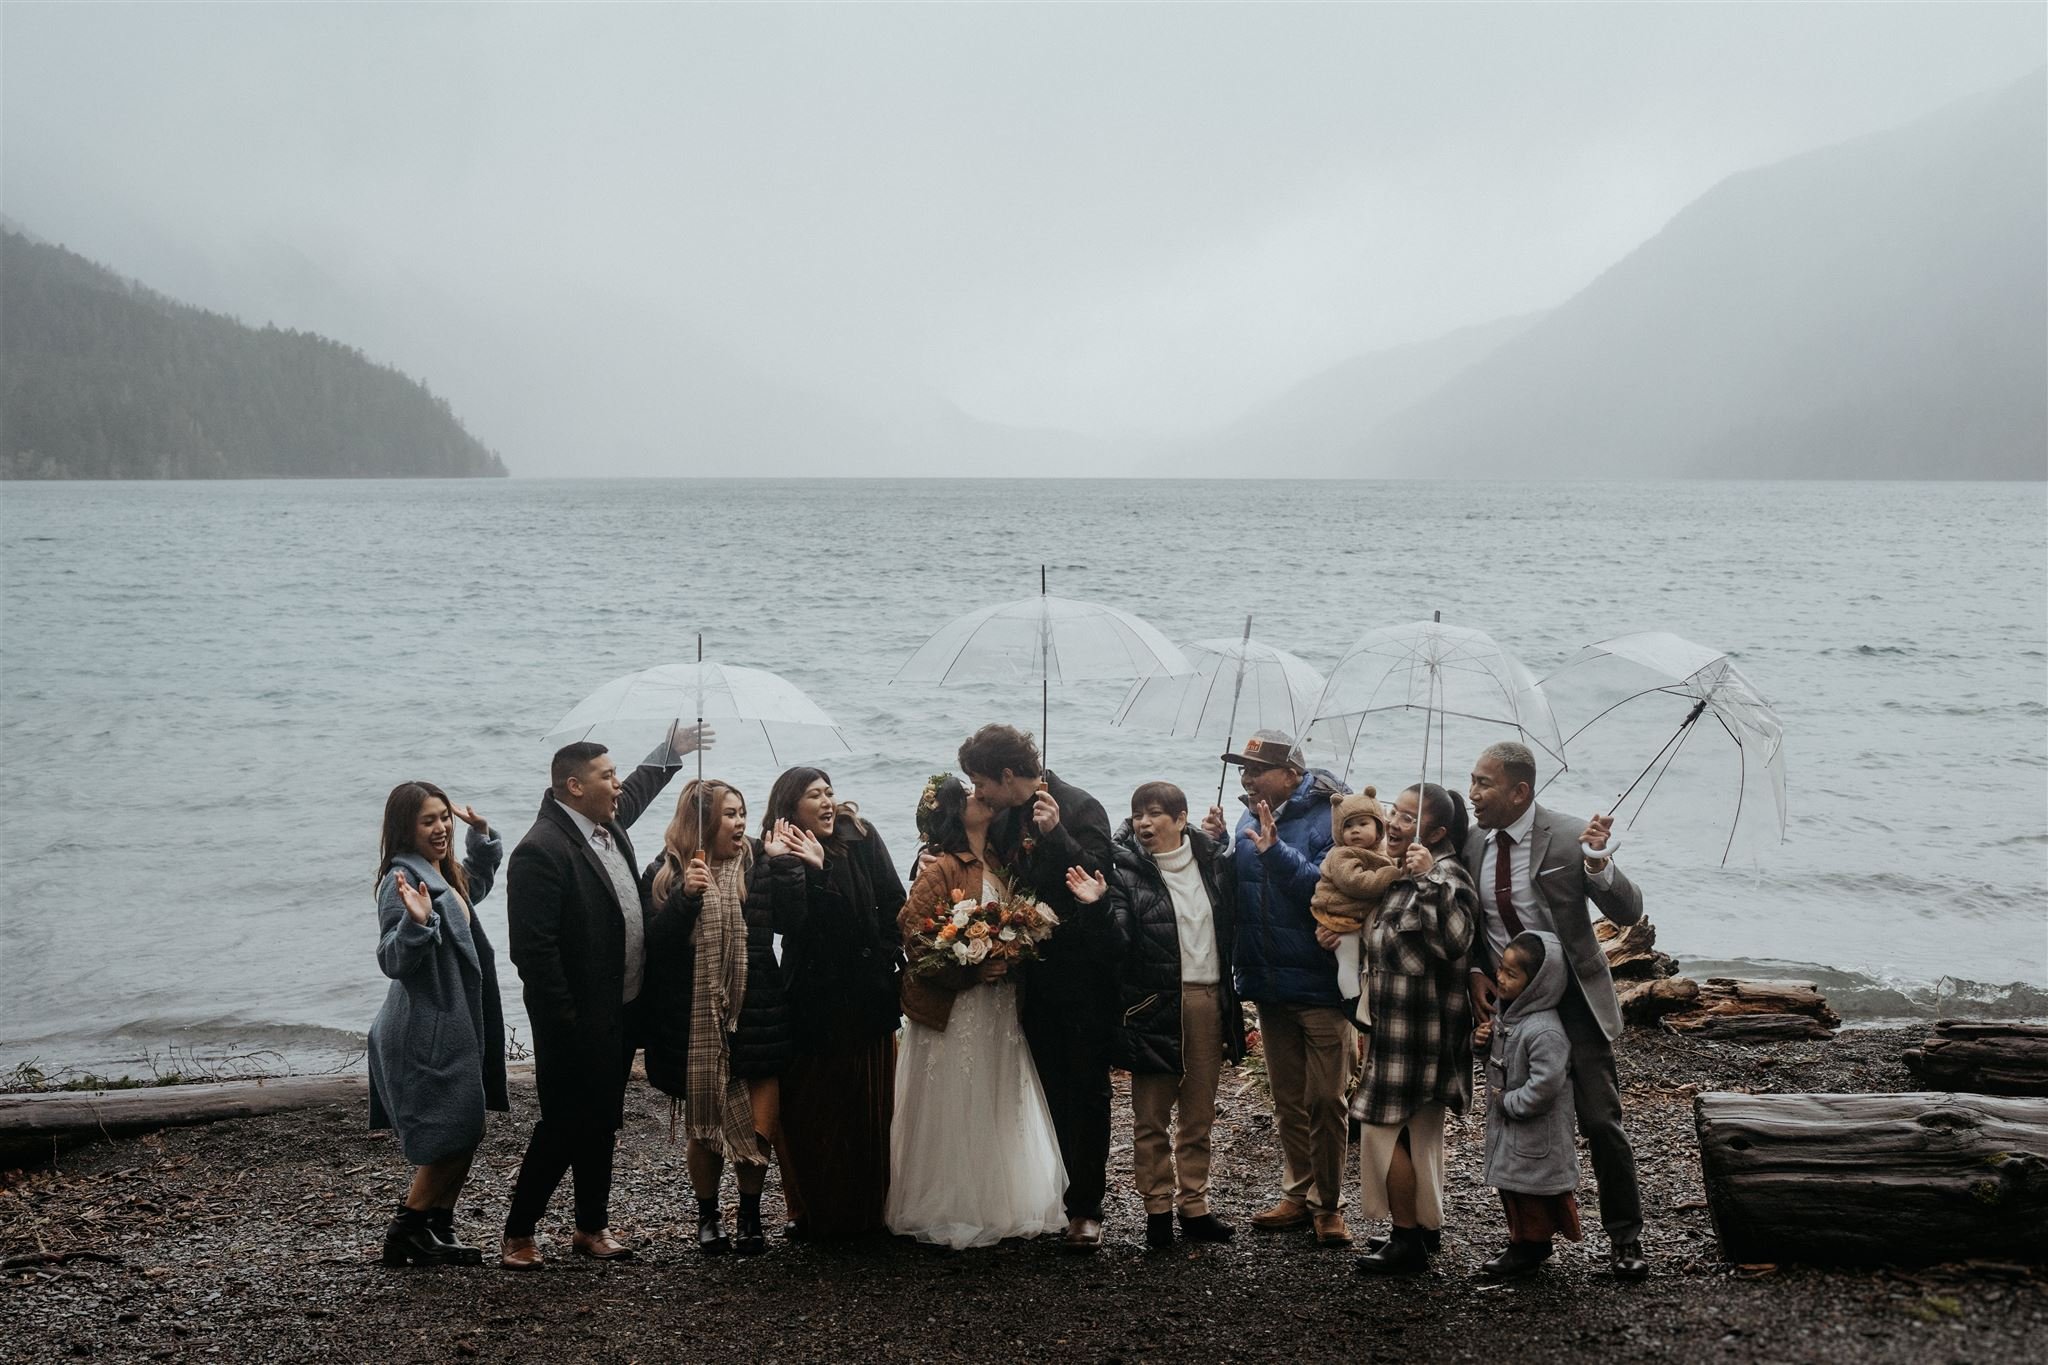 Bride and groom kiss during wedding party photos in Olympic National Park